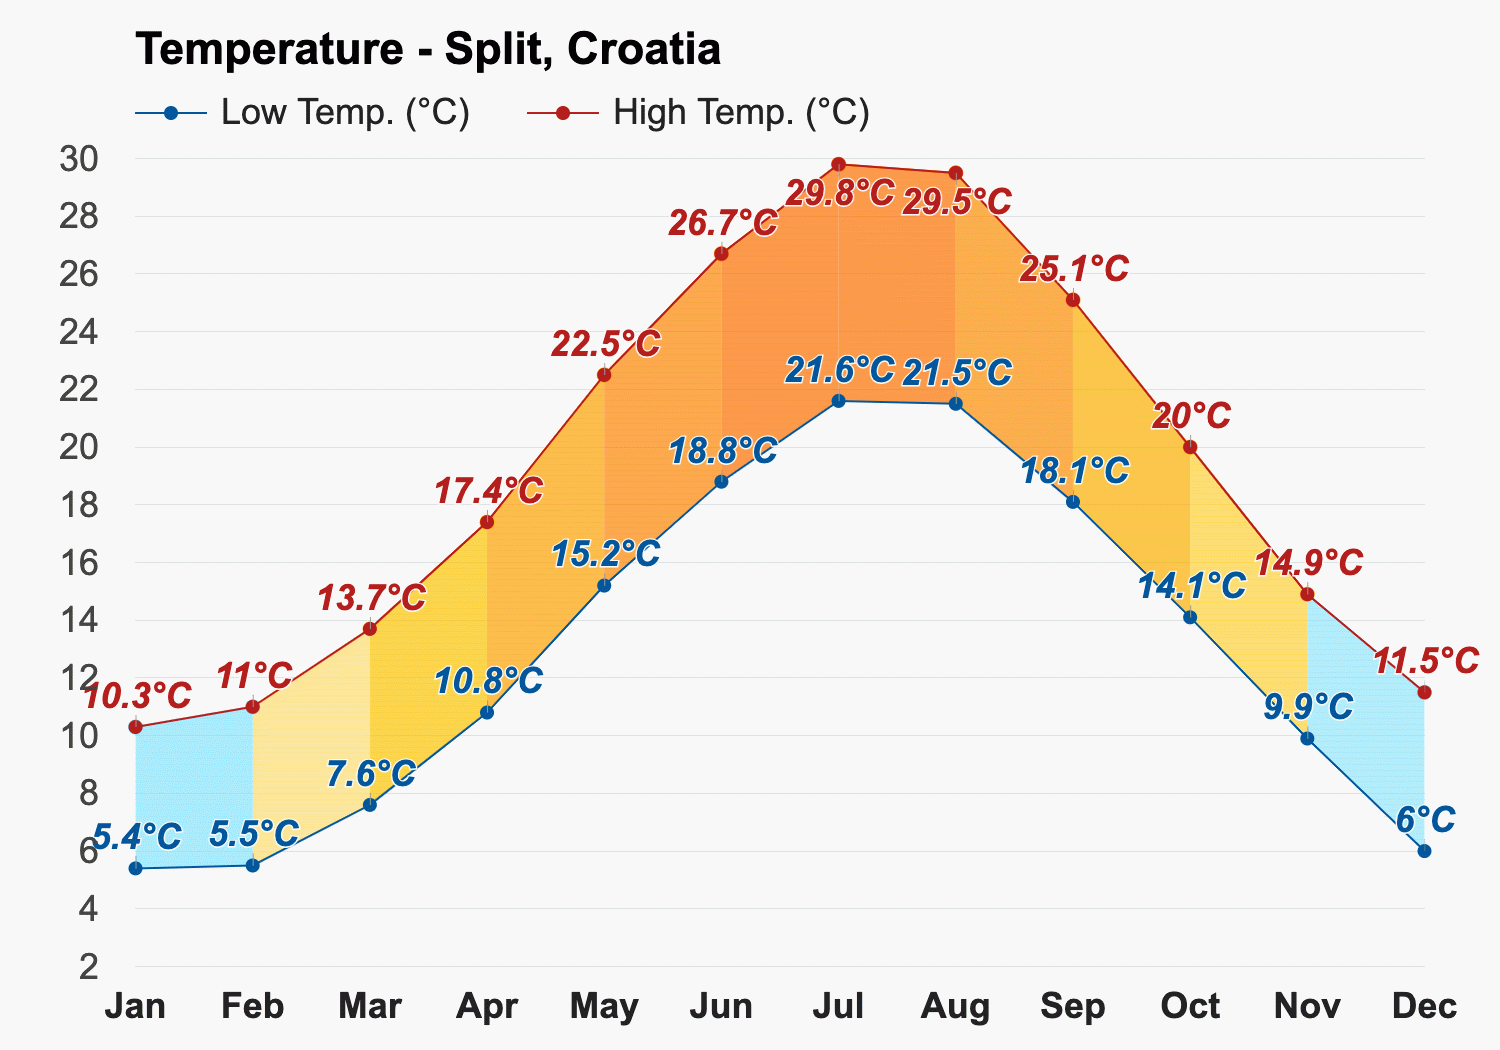 Best Time To Go To Split, Weather And Climate. 3 Months To Avoid!